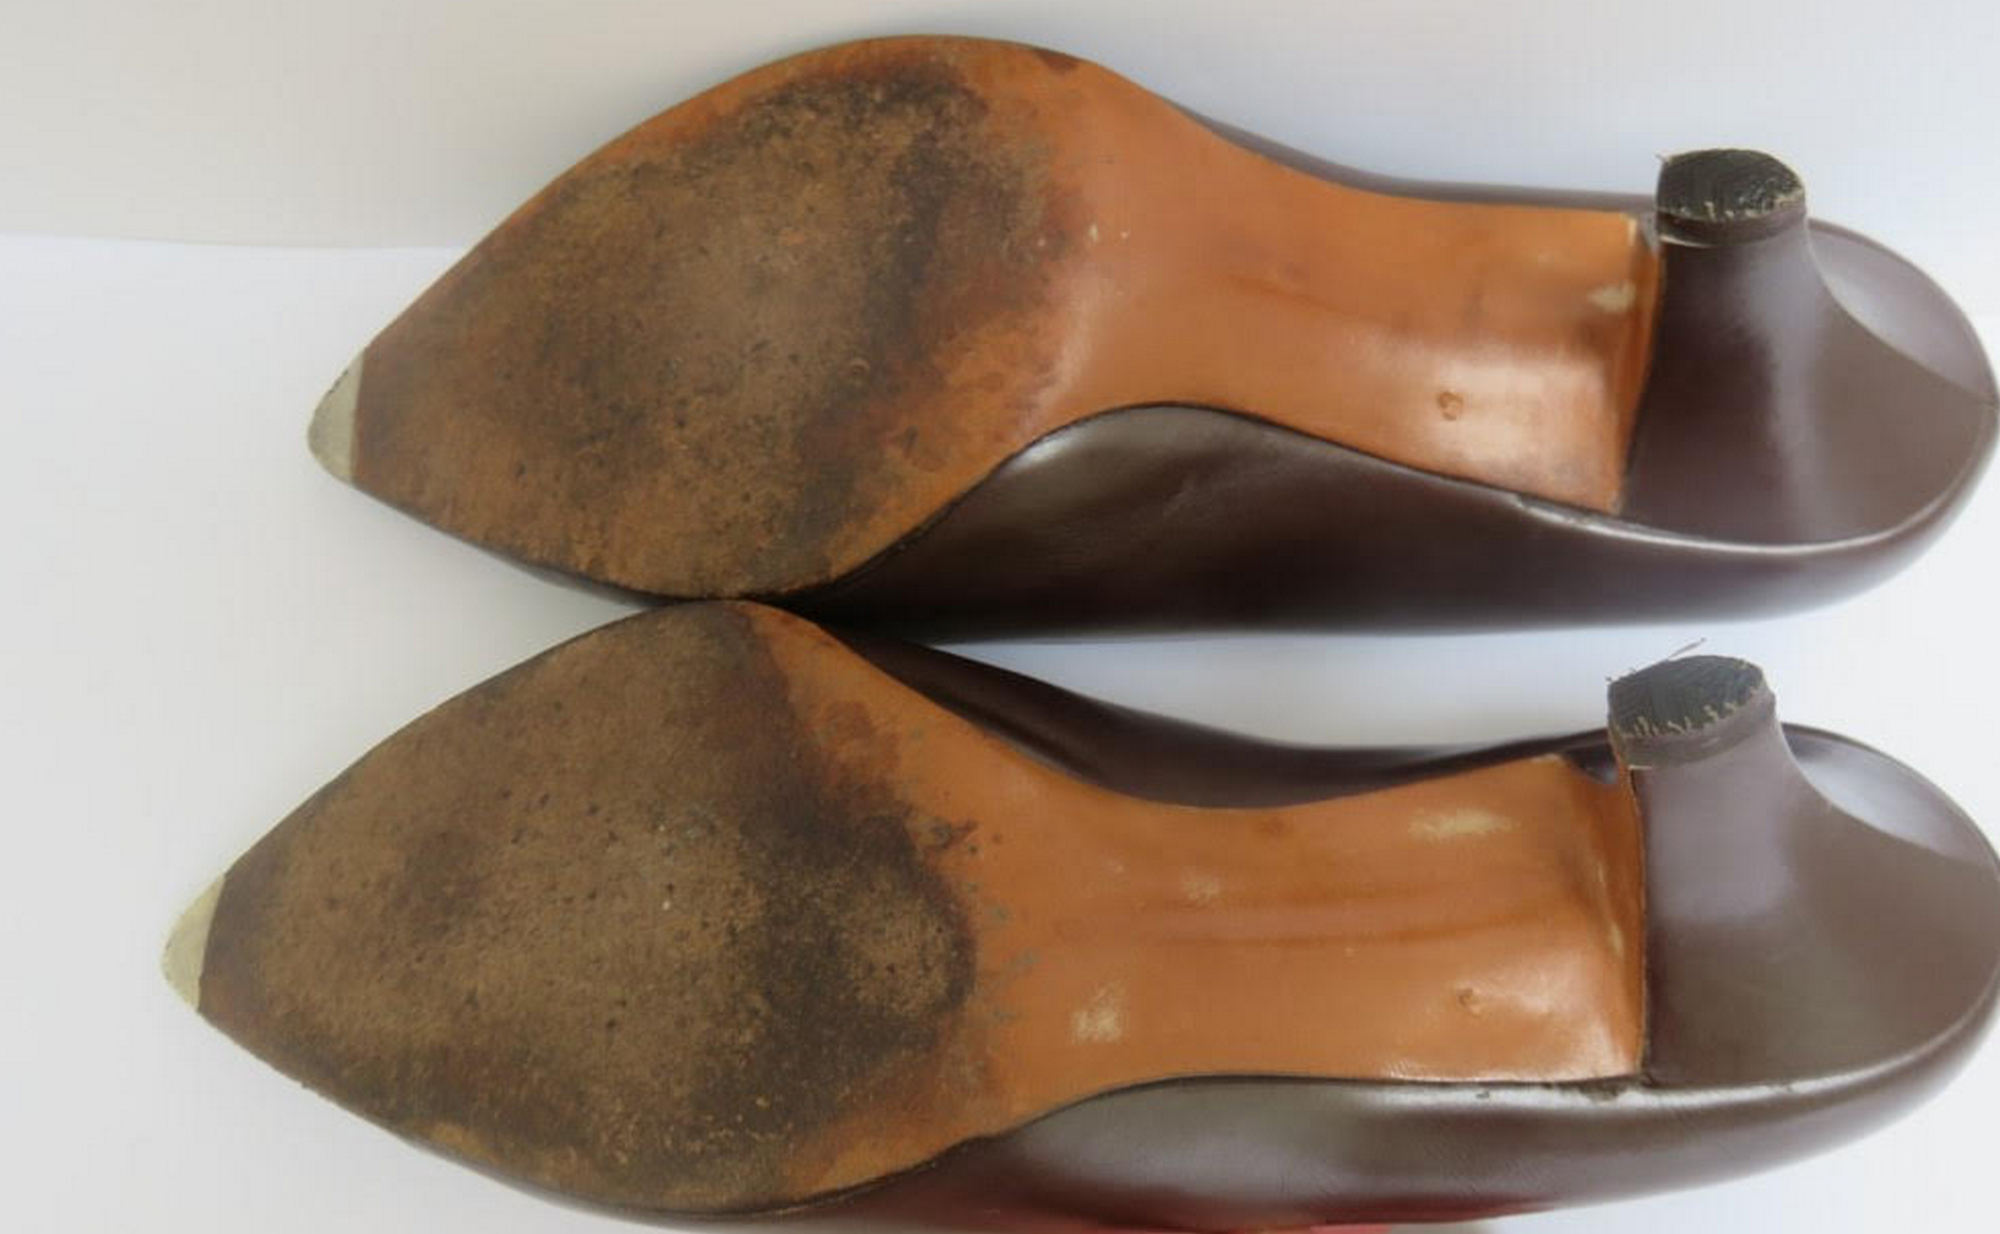 Christian Dior by Roger Vivier leather shoes circa 1960. - Image 6 of 6